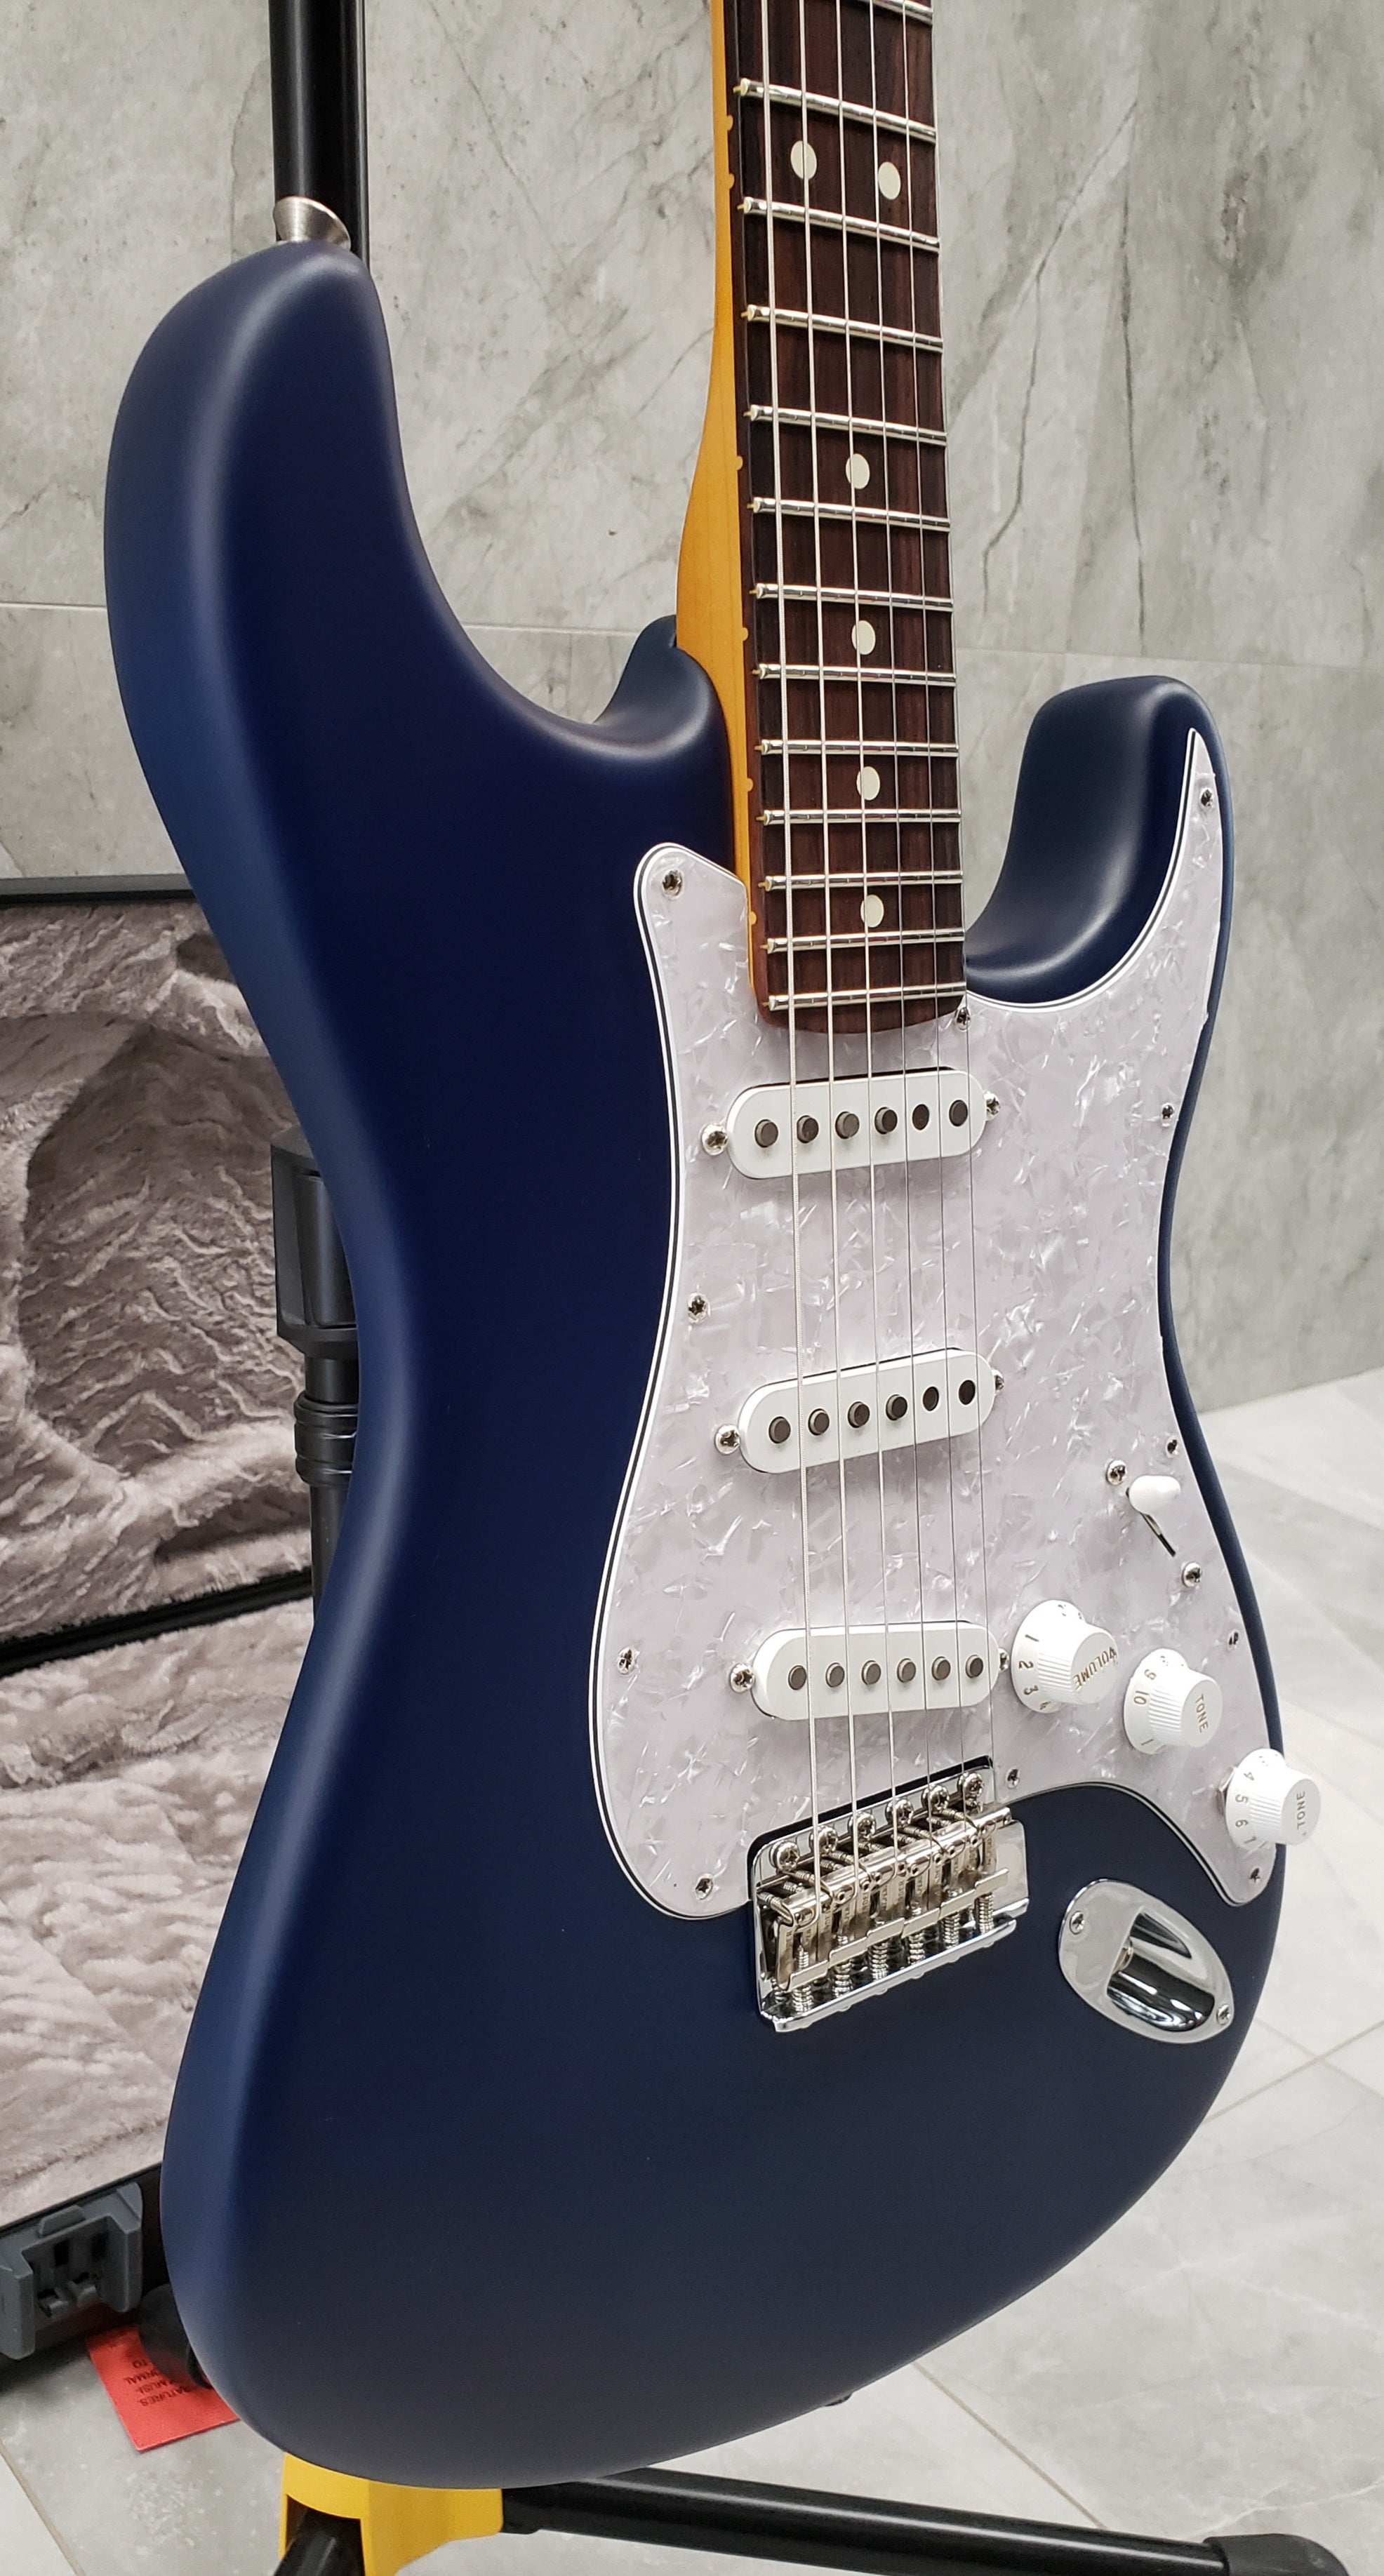 Fender Cory Wong Stratocaster Rosewood Fingerboard Sapphire Blue Transparent F-0115010727 SERIAL NUMBER CW220874 - 7.6 LBS